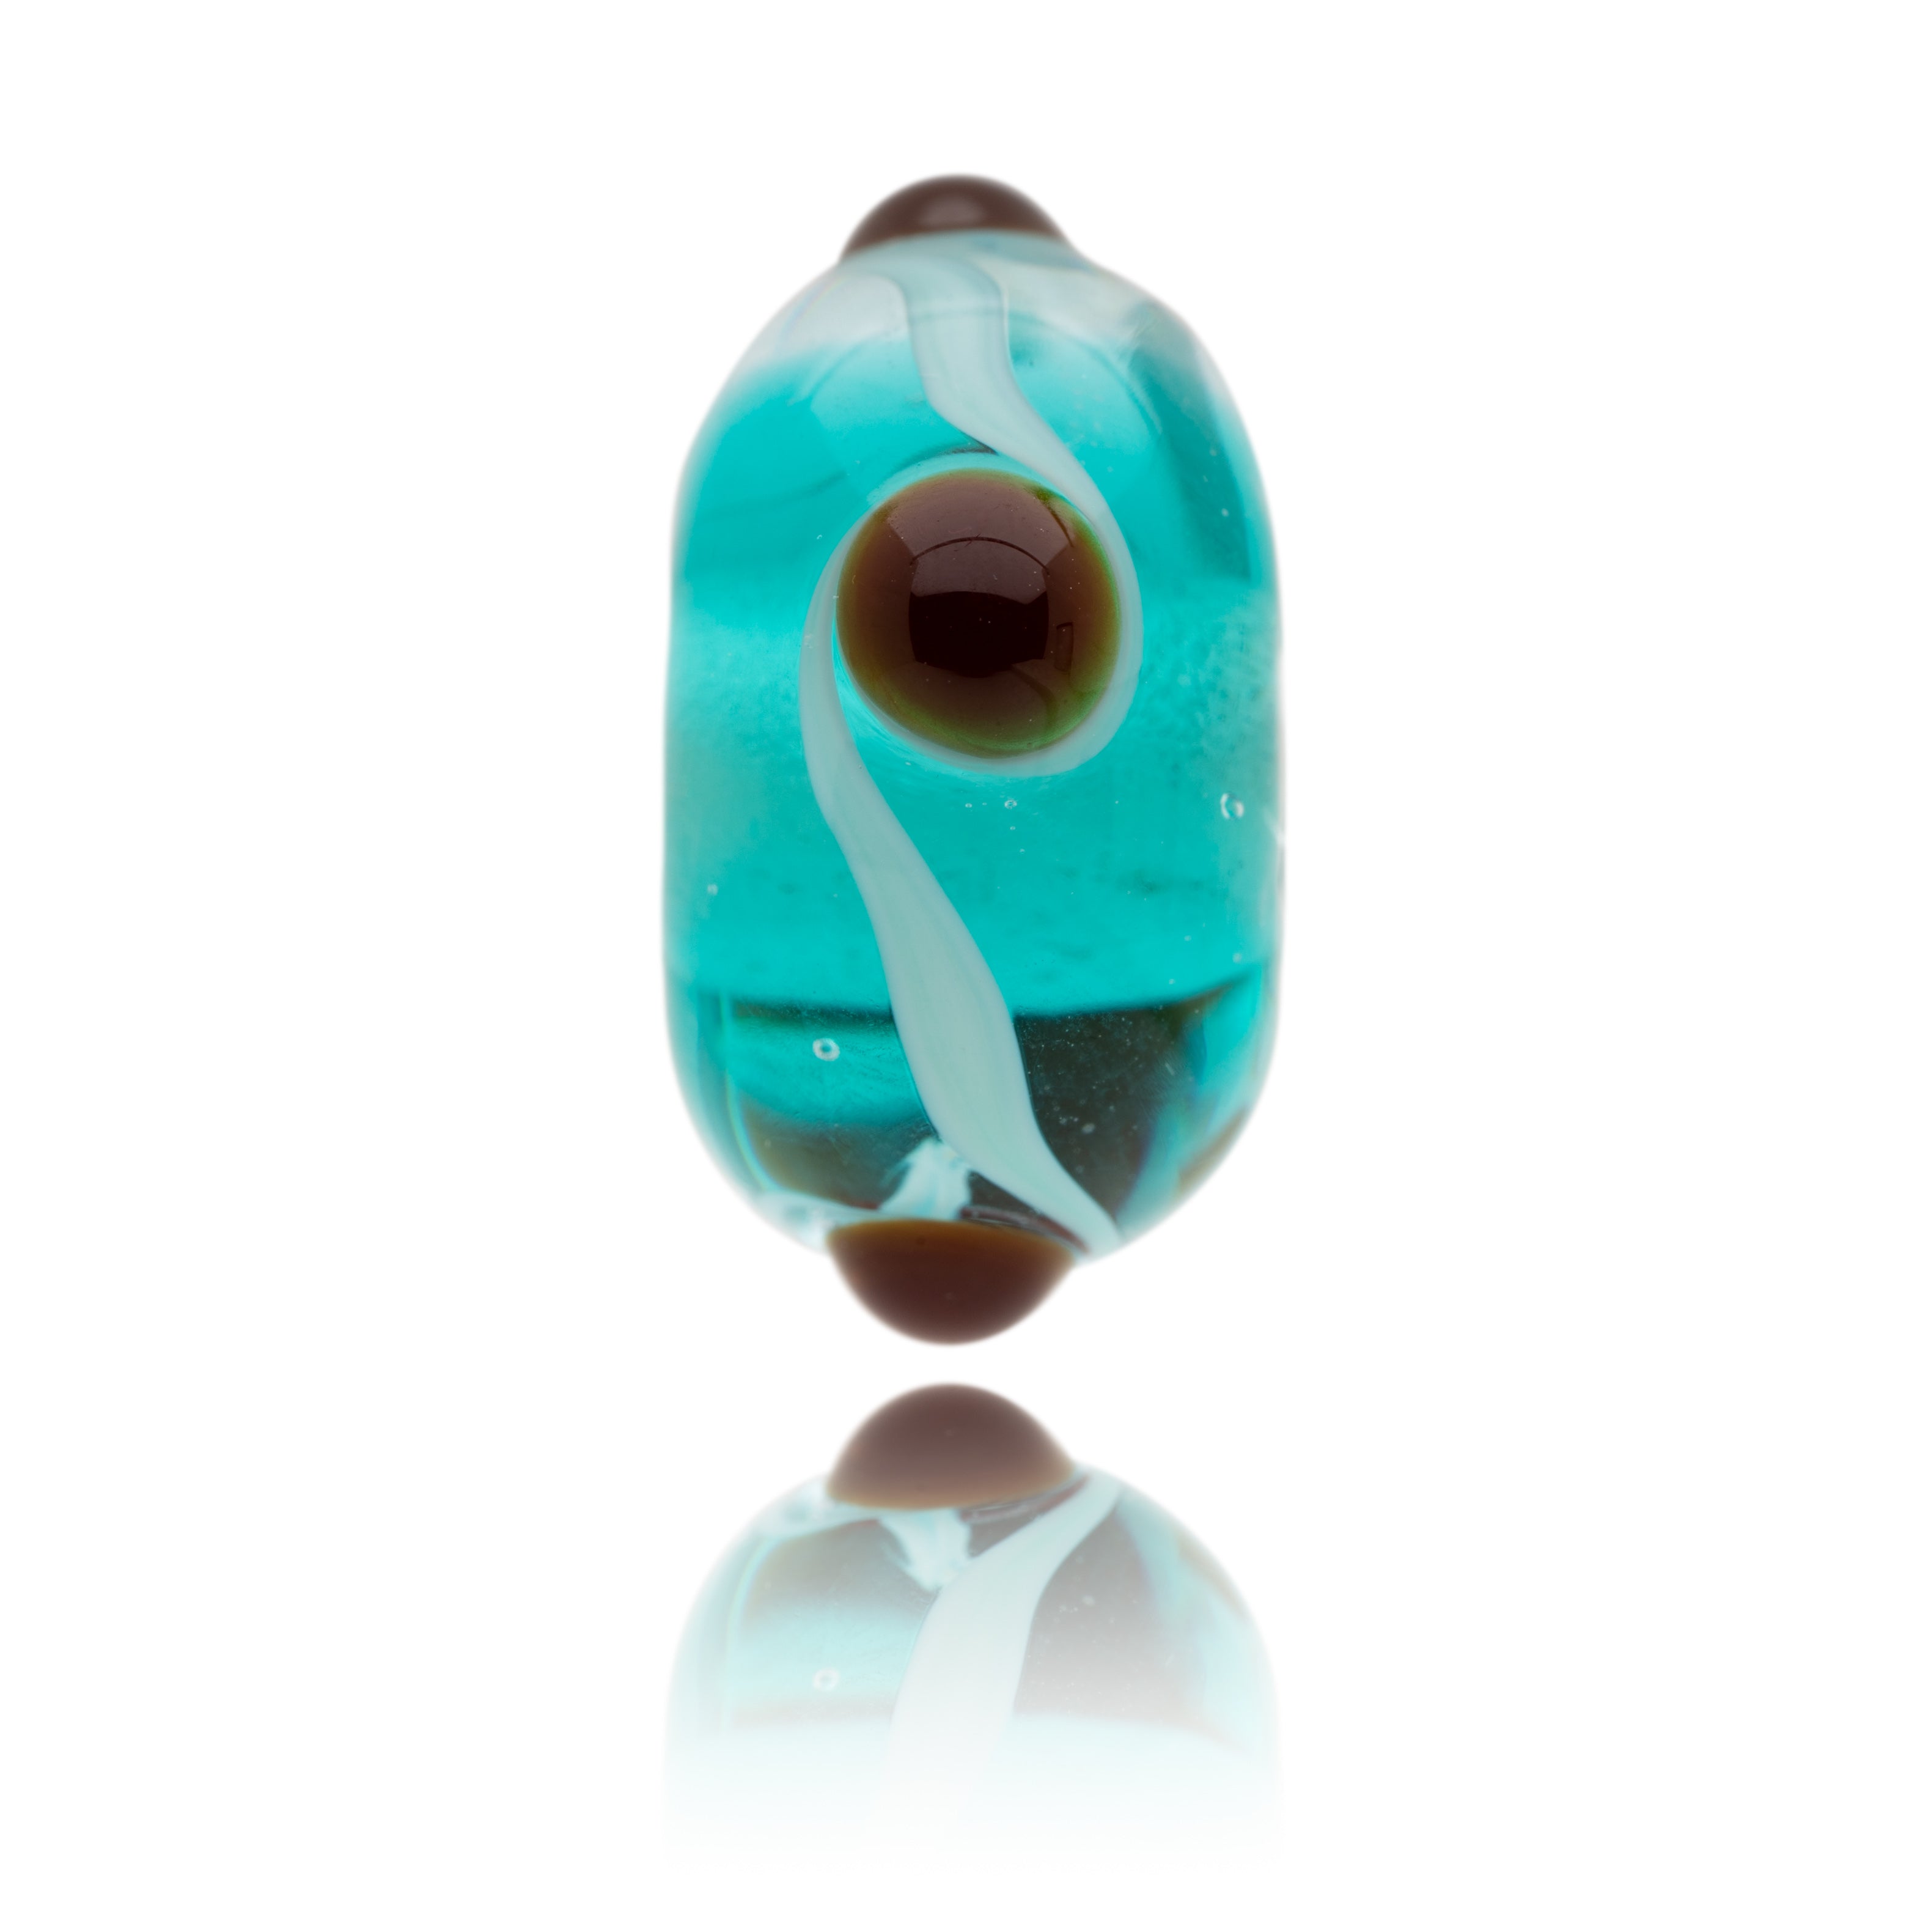 Turquoise and clear Murano glass bead with brown dots, representing Watermouth Cove in North Devon.